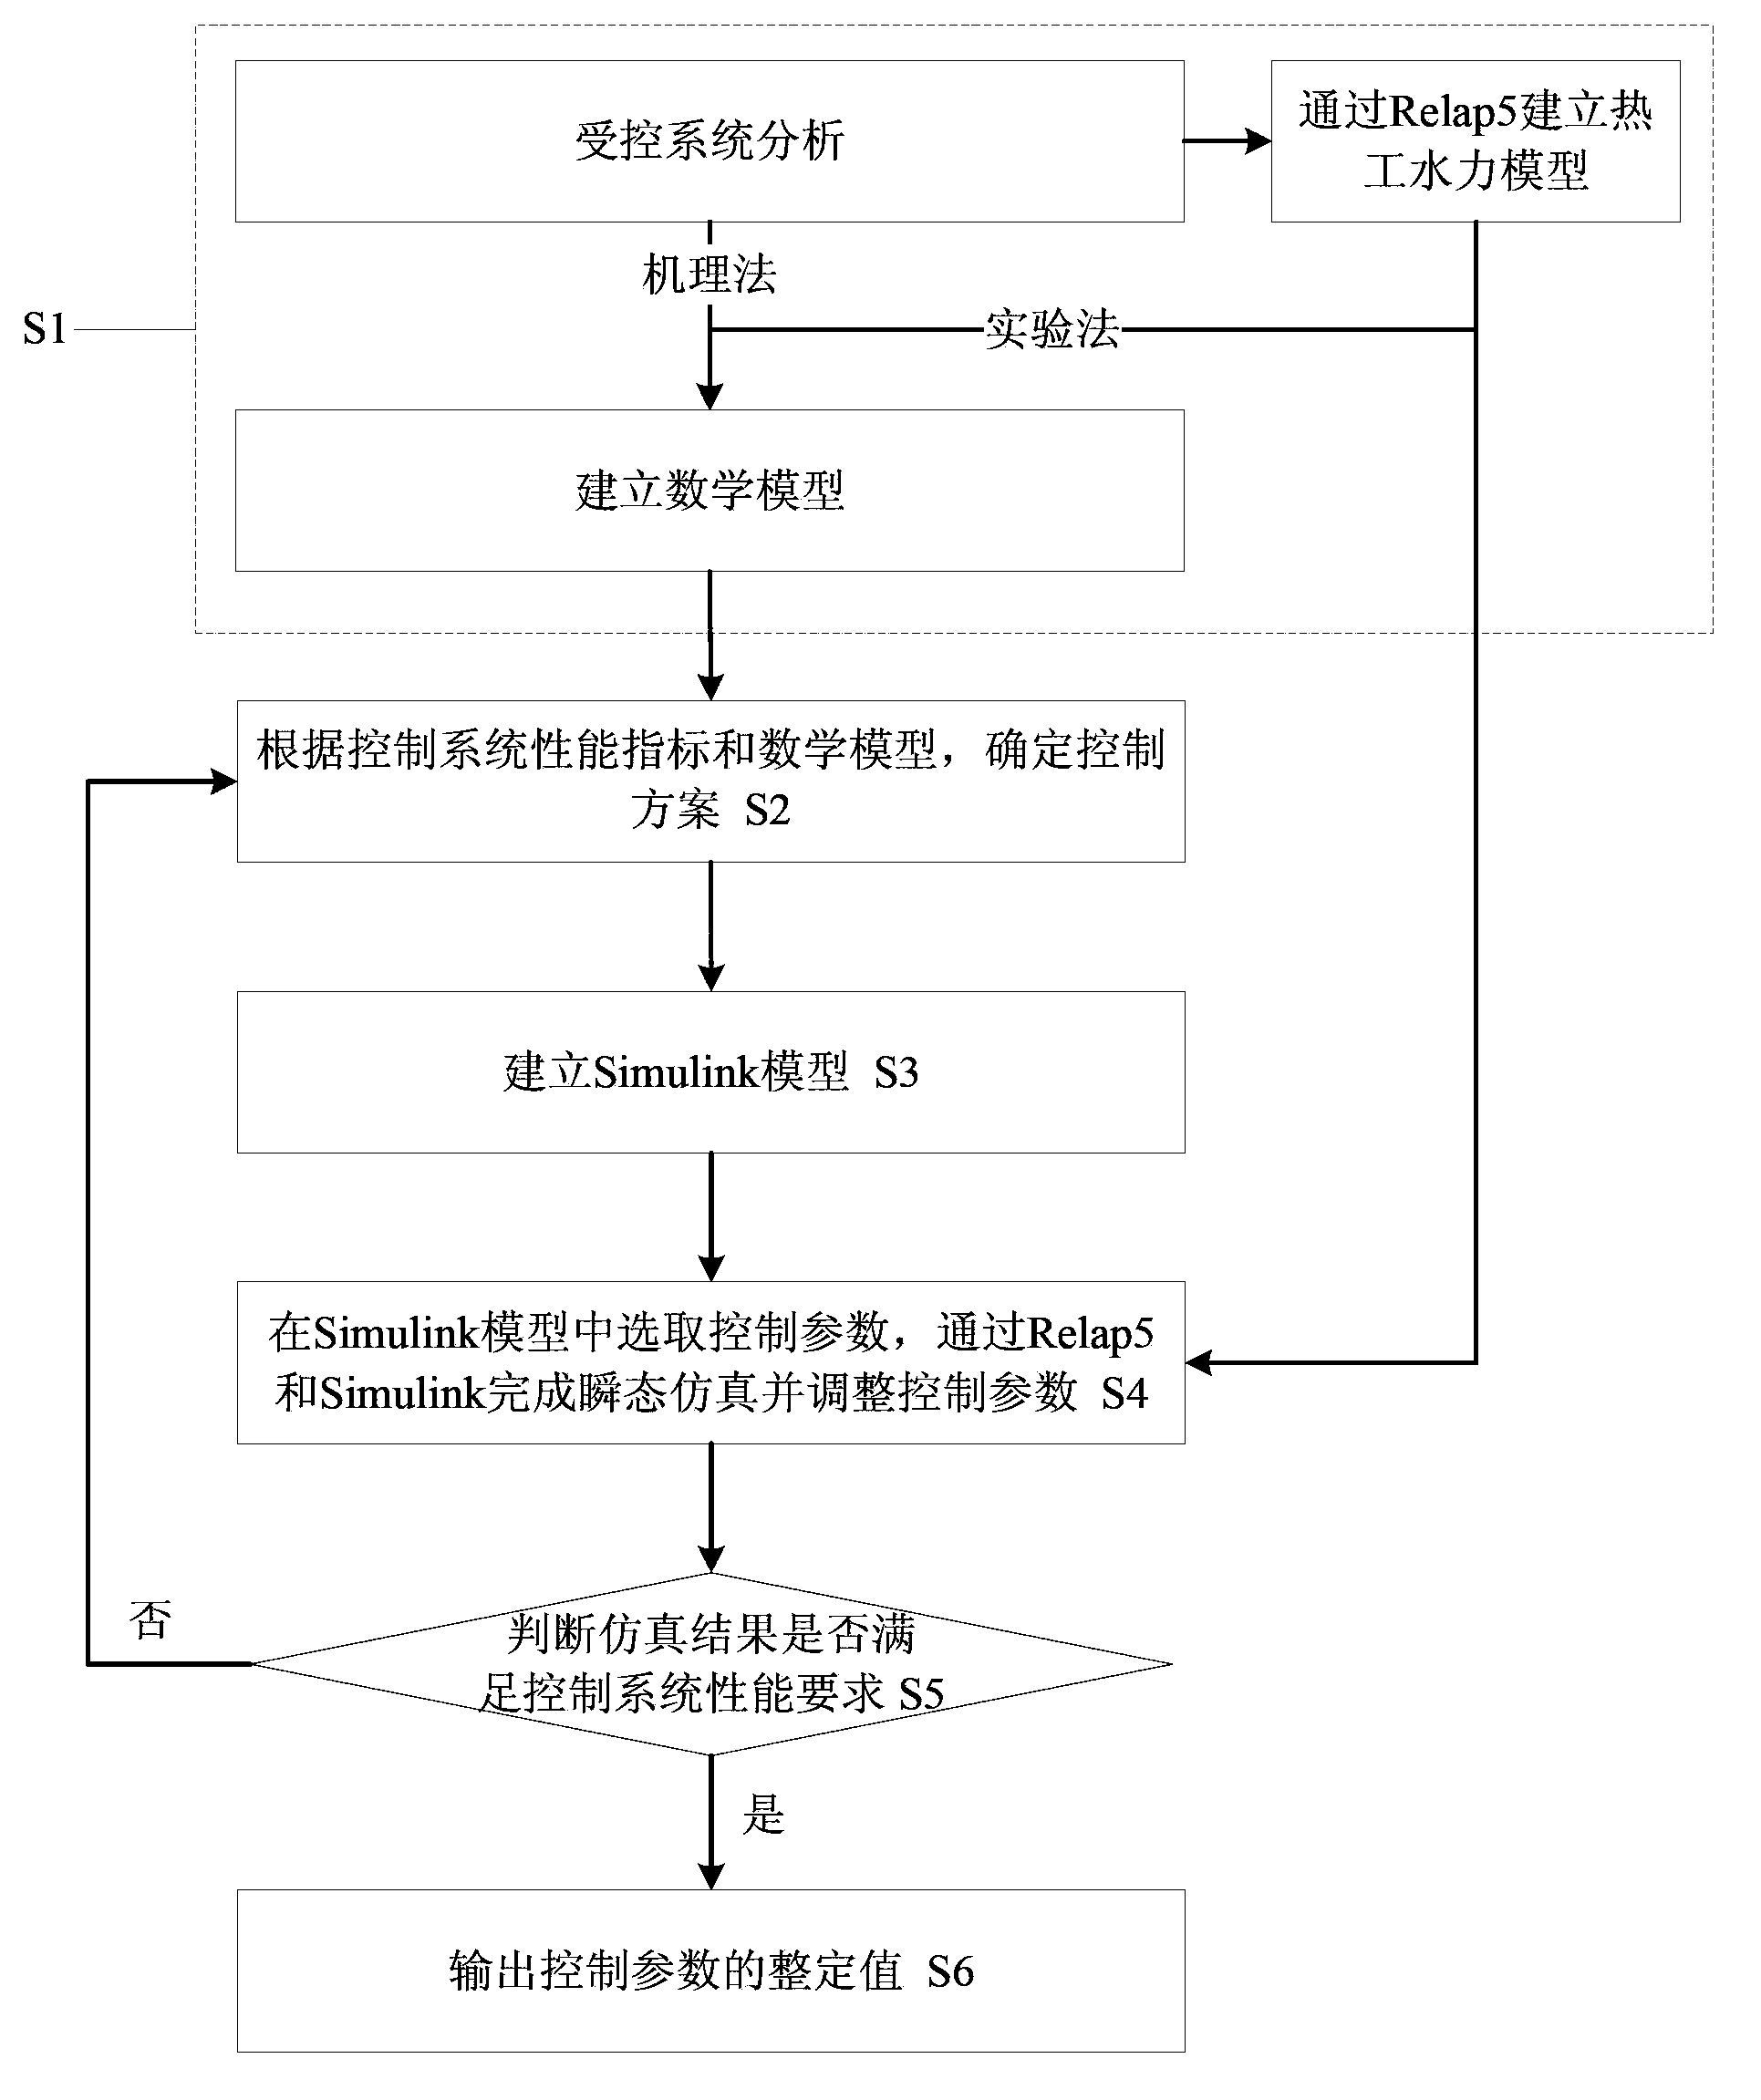 Design method for nuclear power station reactor control system